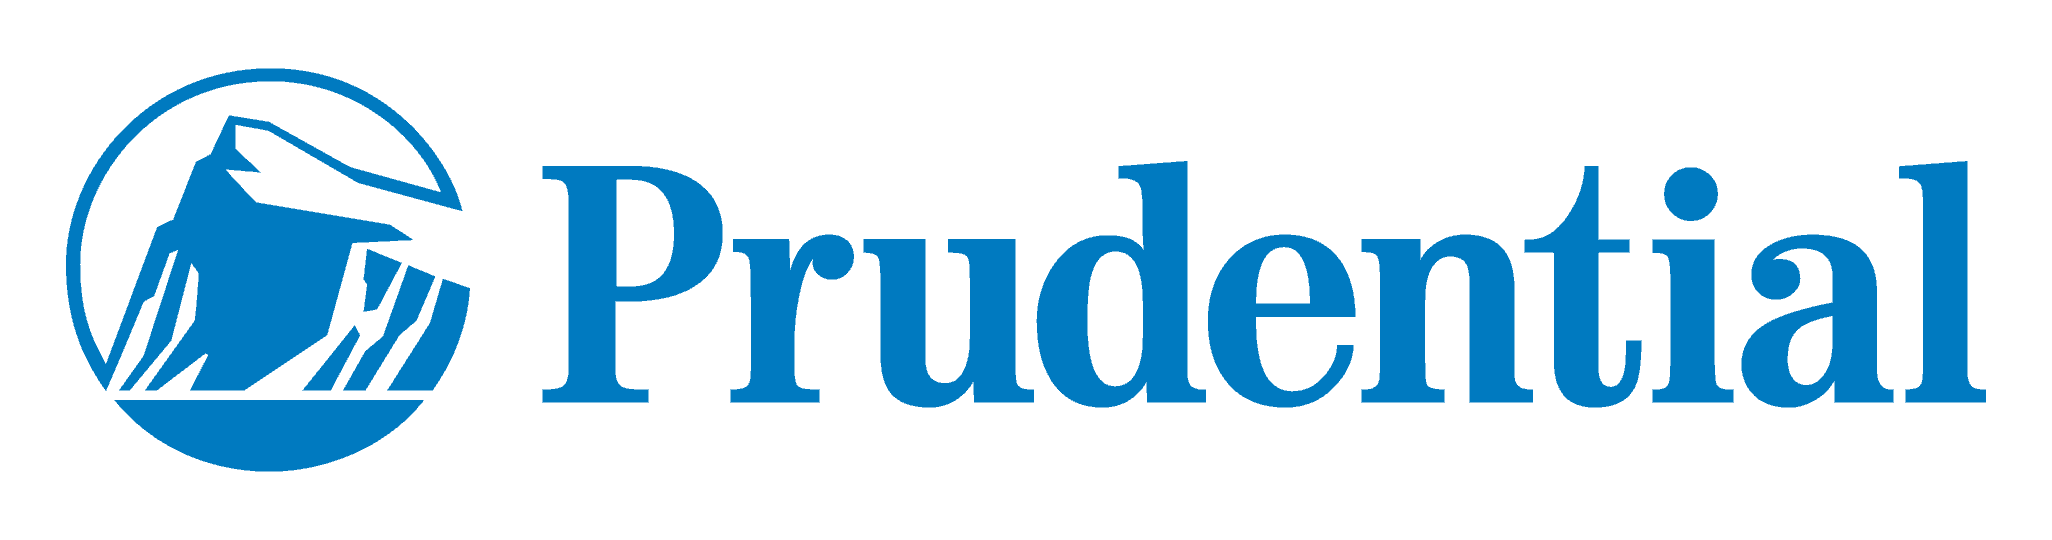 A startup logo with the word Prudential on it.